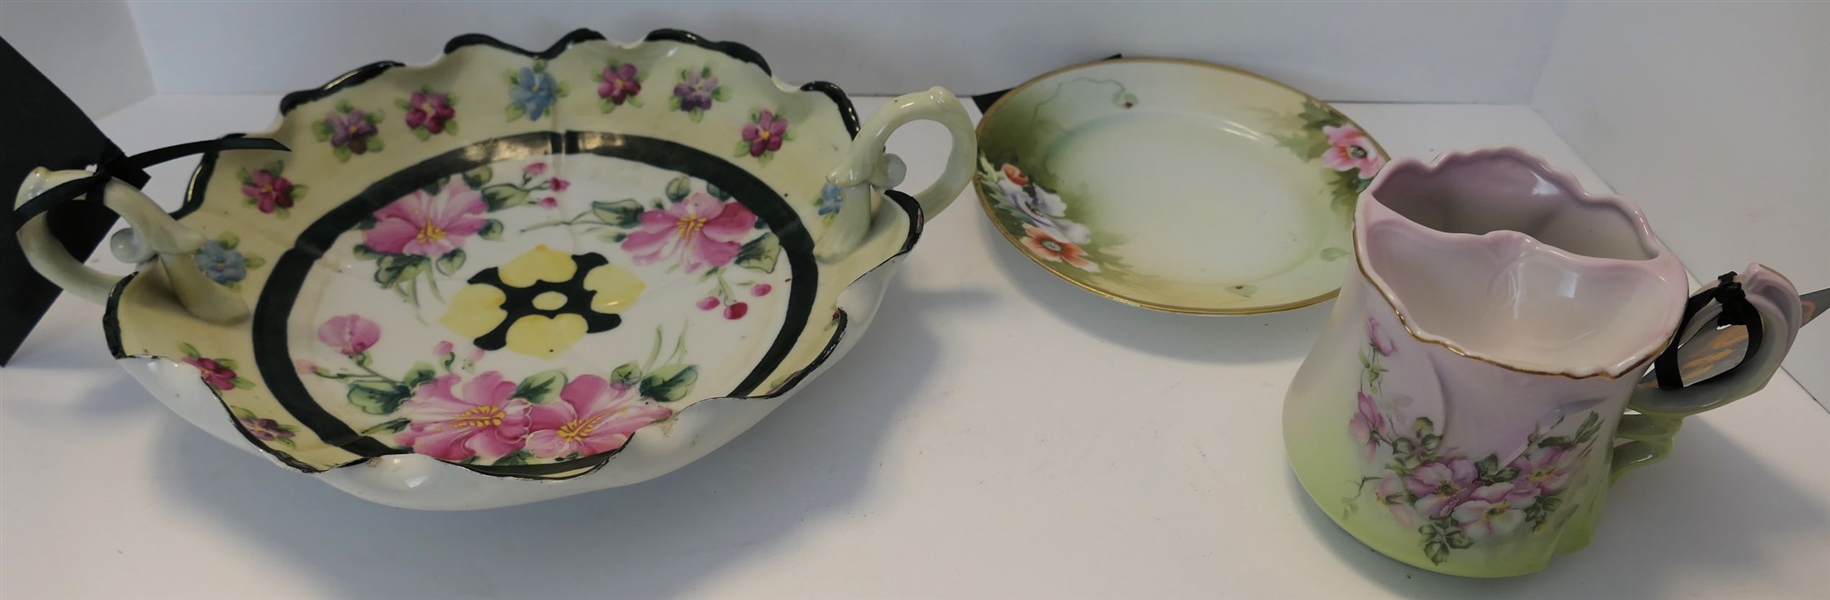 3 Pieces of Hand Painted Nippon including Shaving Mug, Small Plate and 11" Double Handled Dish 